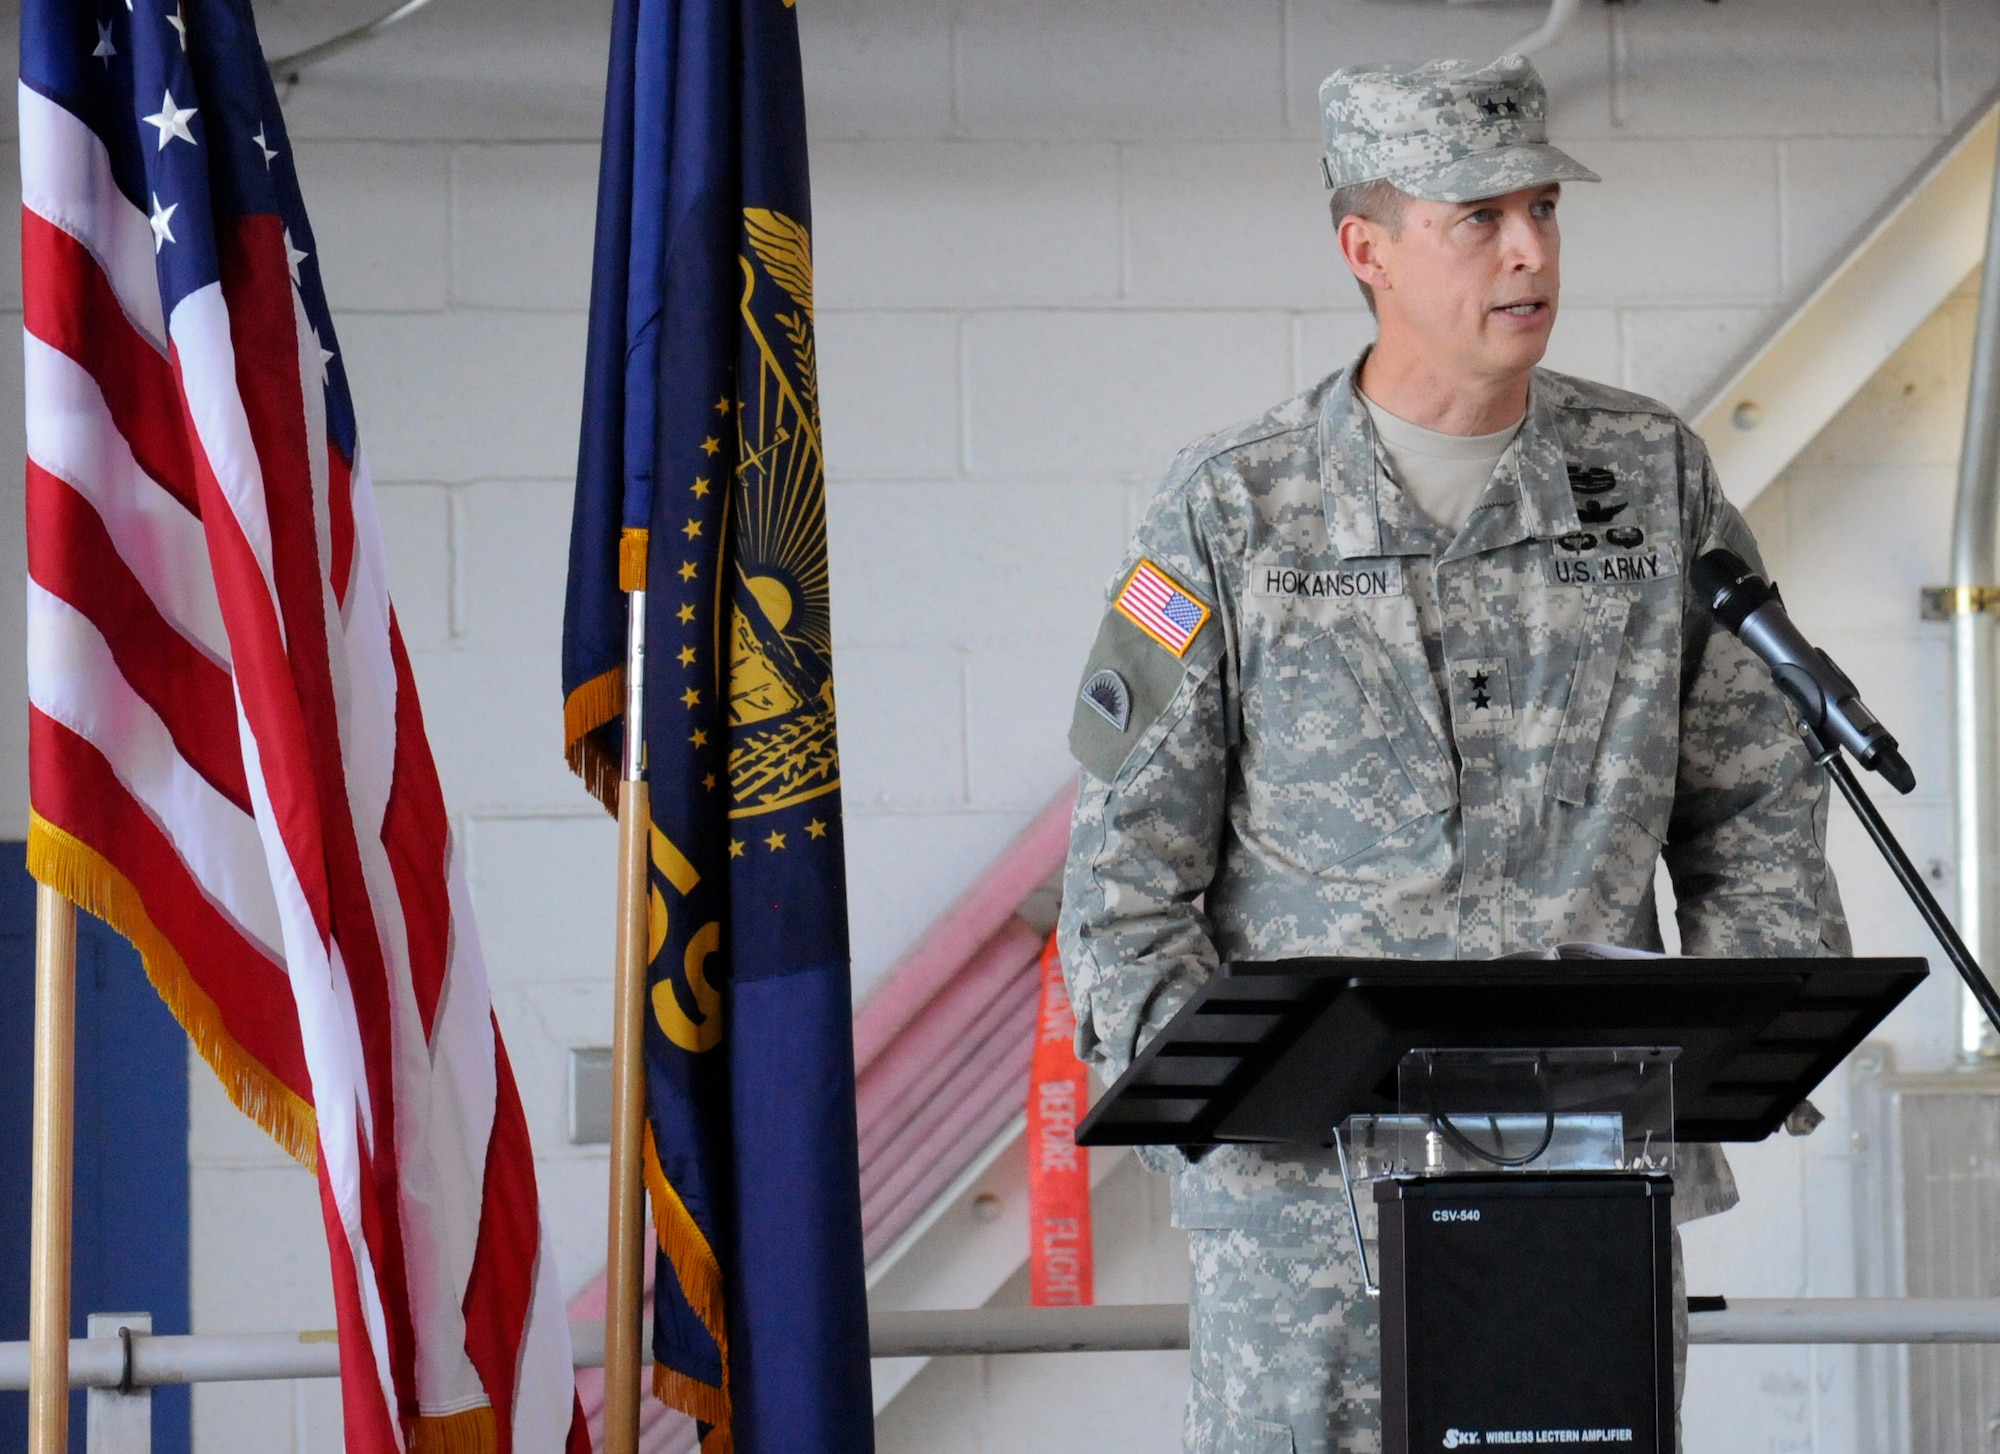 Army National Guard Maj. Gen. Daniel Hokanson, Adjutant General for Oregon, addresses members of the 142nd Fighter Wing and family members during the formal mobilization ceremony, June 26, 2015, Portland Air National Guard Base, Ore. (U.S. Air National Guard photo by Tech. Sgt. John Hughel, 142nd Fighter Wing Public Affairs/Released)